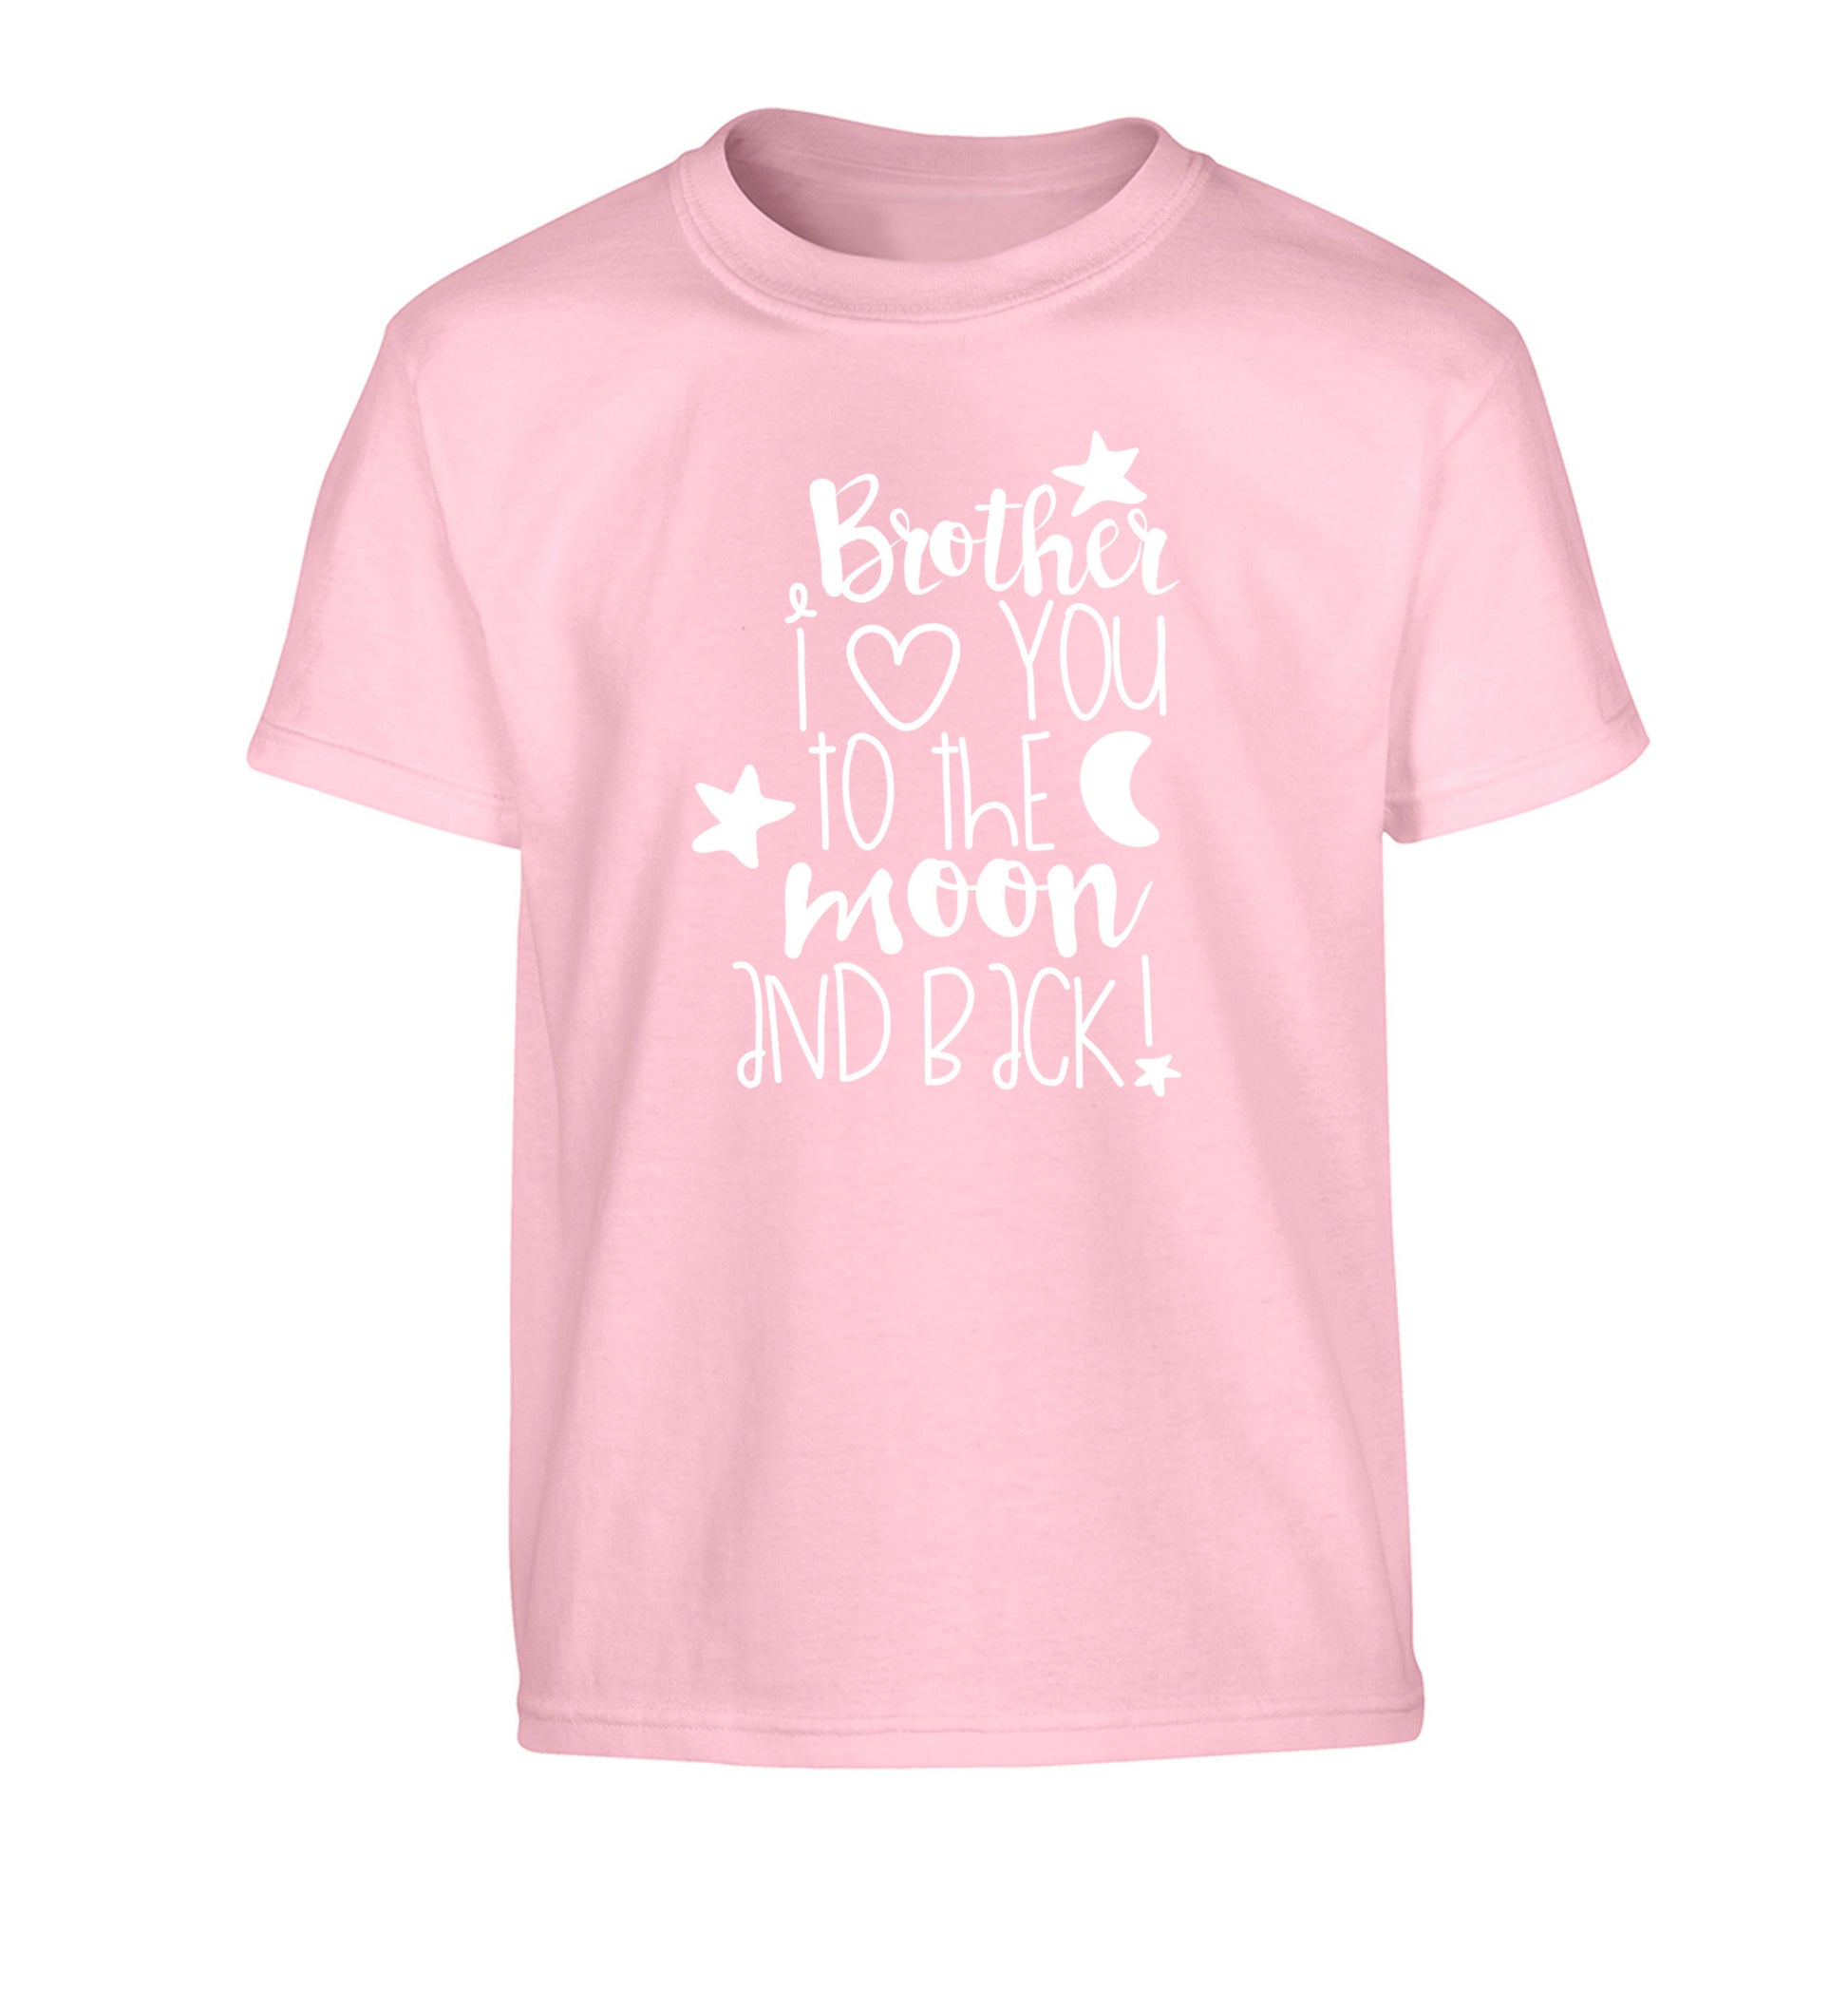 Brother I love you to the moon and back Children's light pink Tshirt 12-14 Years